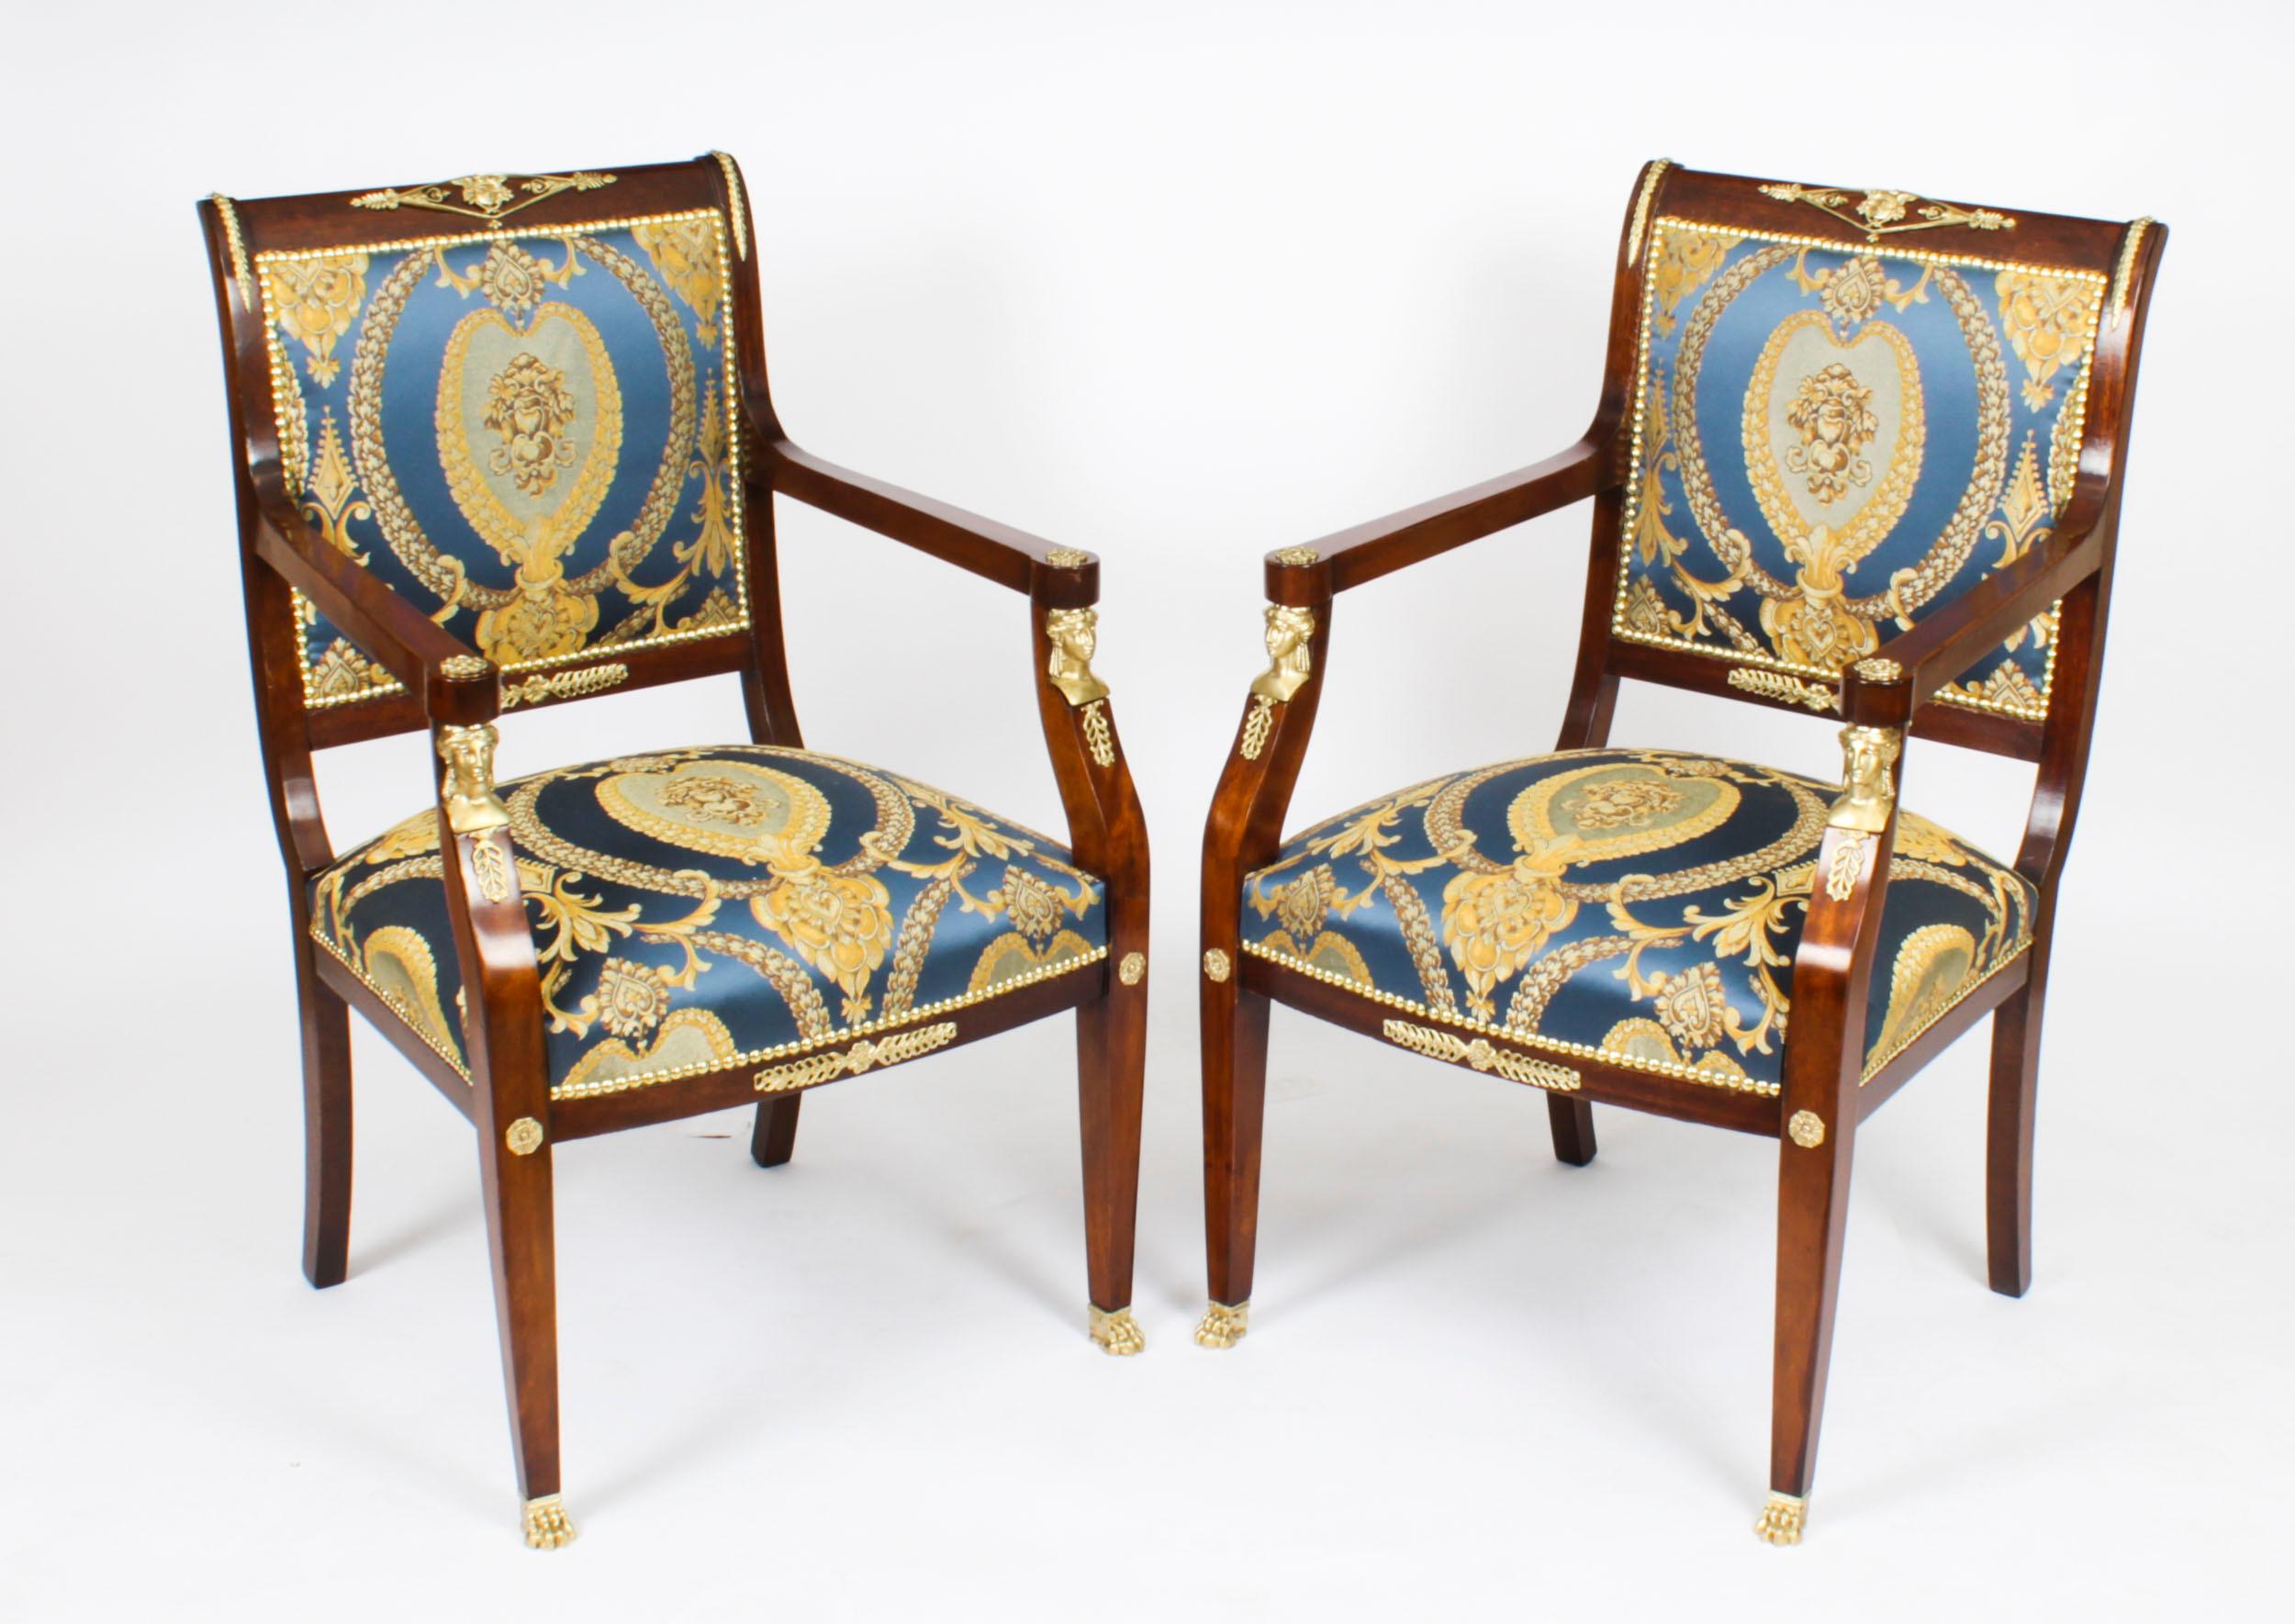 This is a fantastic and highly decorative antique pair of French ormolu mounted Empire fauteuil armchairs, circa 1870 in date.
 
They feature scrolled square padded backs mounted with laurel trails and Apollo masks above stuff-over seats flanked